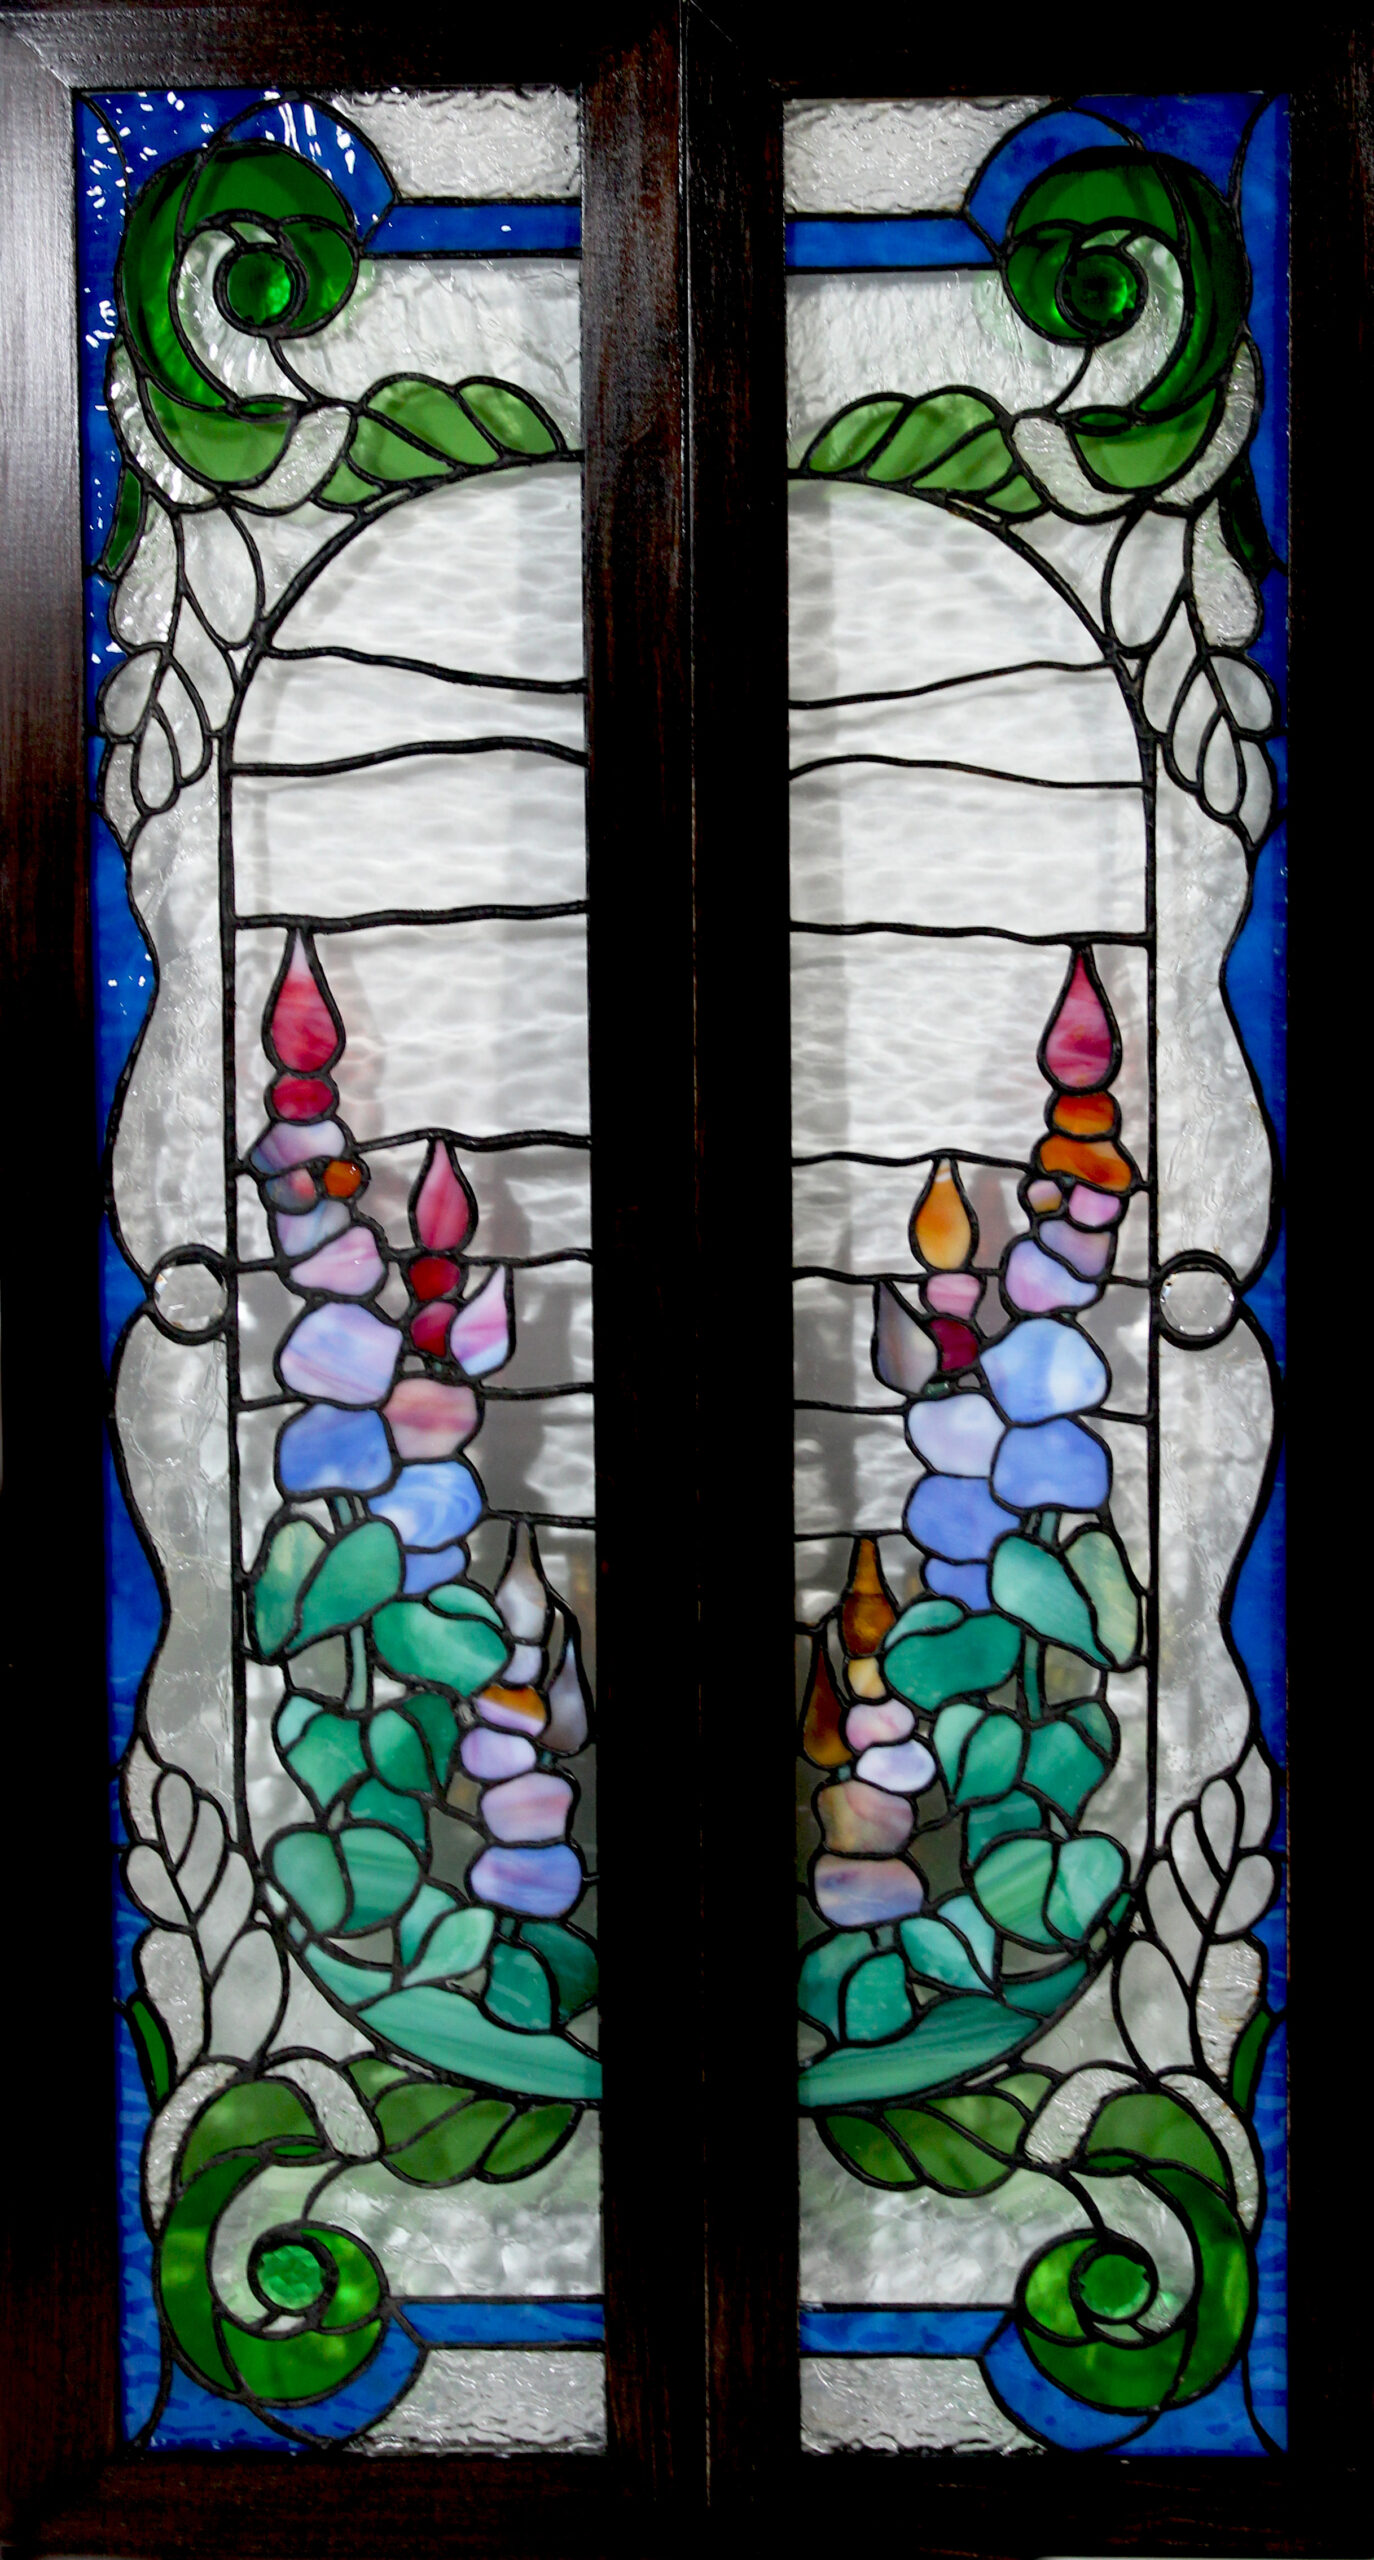 Sidelights is a copper-foil stained glass pair of windows for installation or hanging separately (they are individually framed)